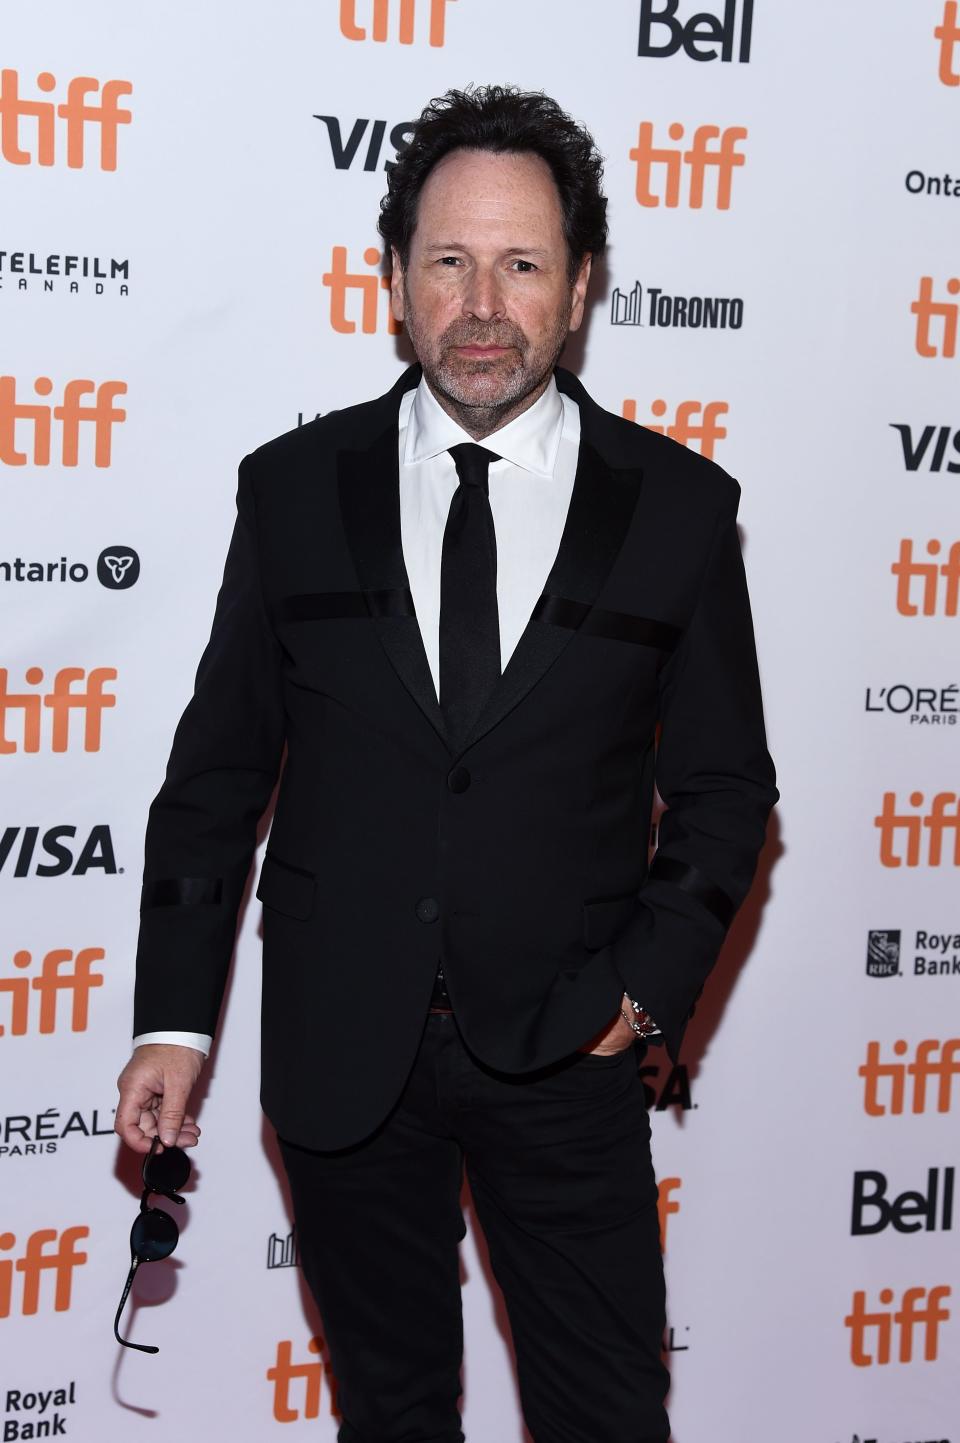 TORONTO, ONTARIO - SEPTEMBER 09: Barry Avrich attends the "David Foster: Off The Record" premiere during the 2019 Toronto International Film Festival at The Elgin on September 09, 2019 in Toronto, Canada. (Photo by Amanda Edwards/Getty Images) ORG XMIT: 775398371 ORIG FILE ID: 1173456266